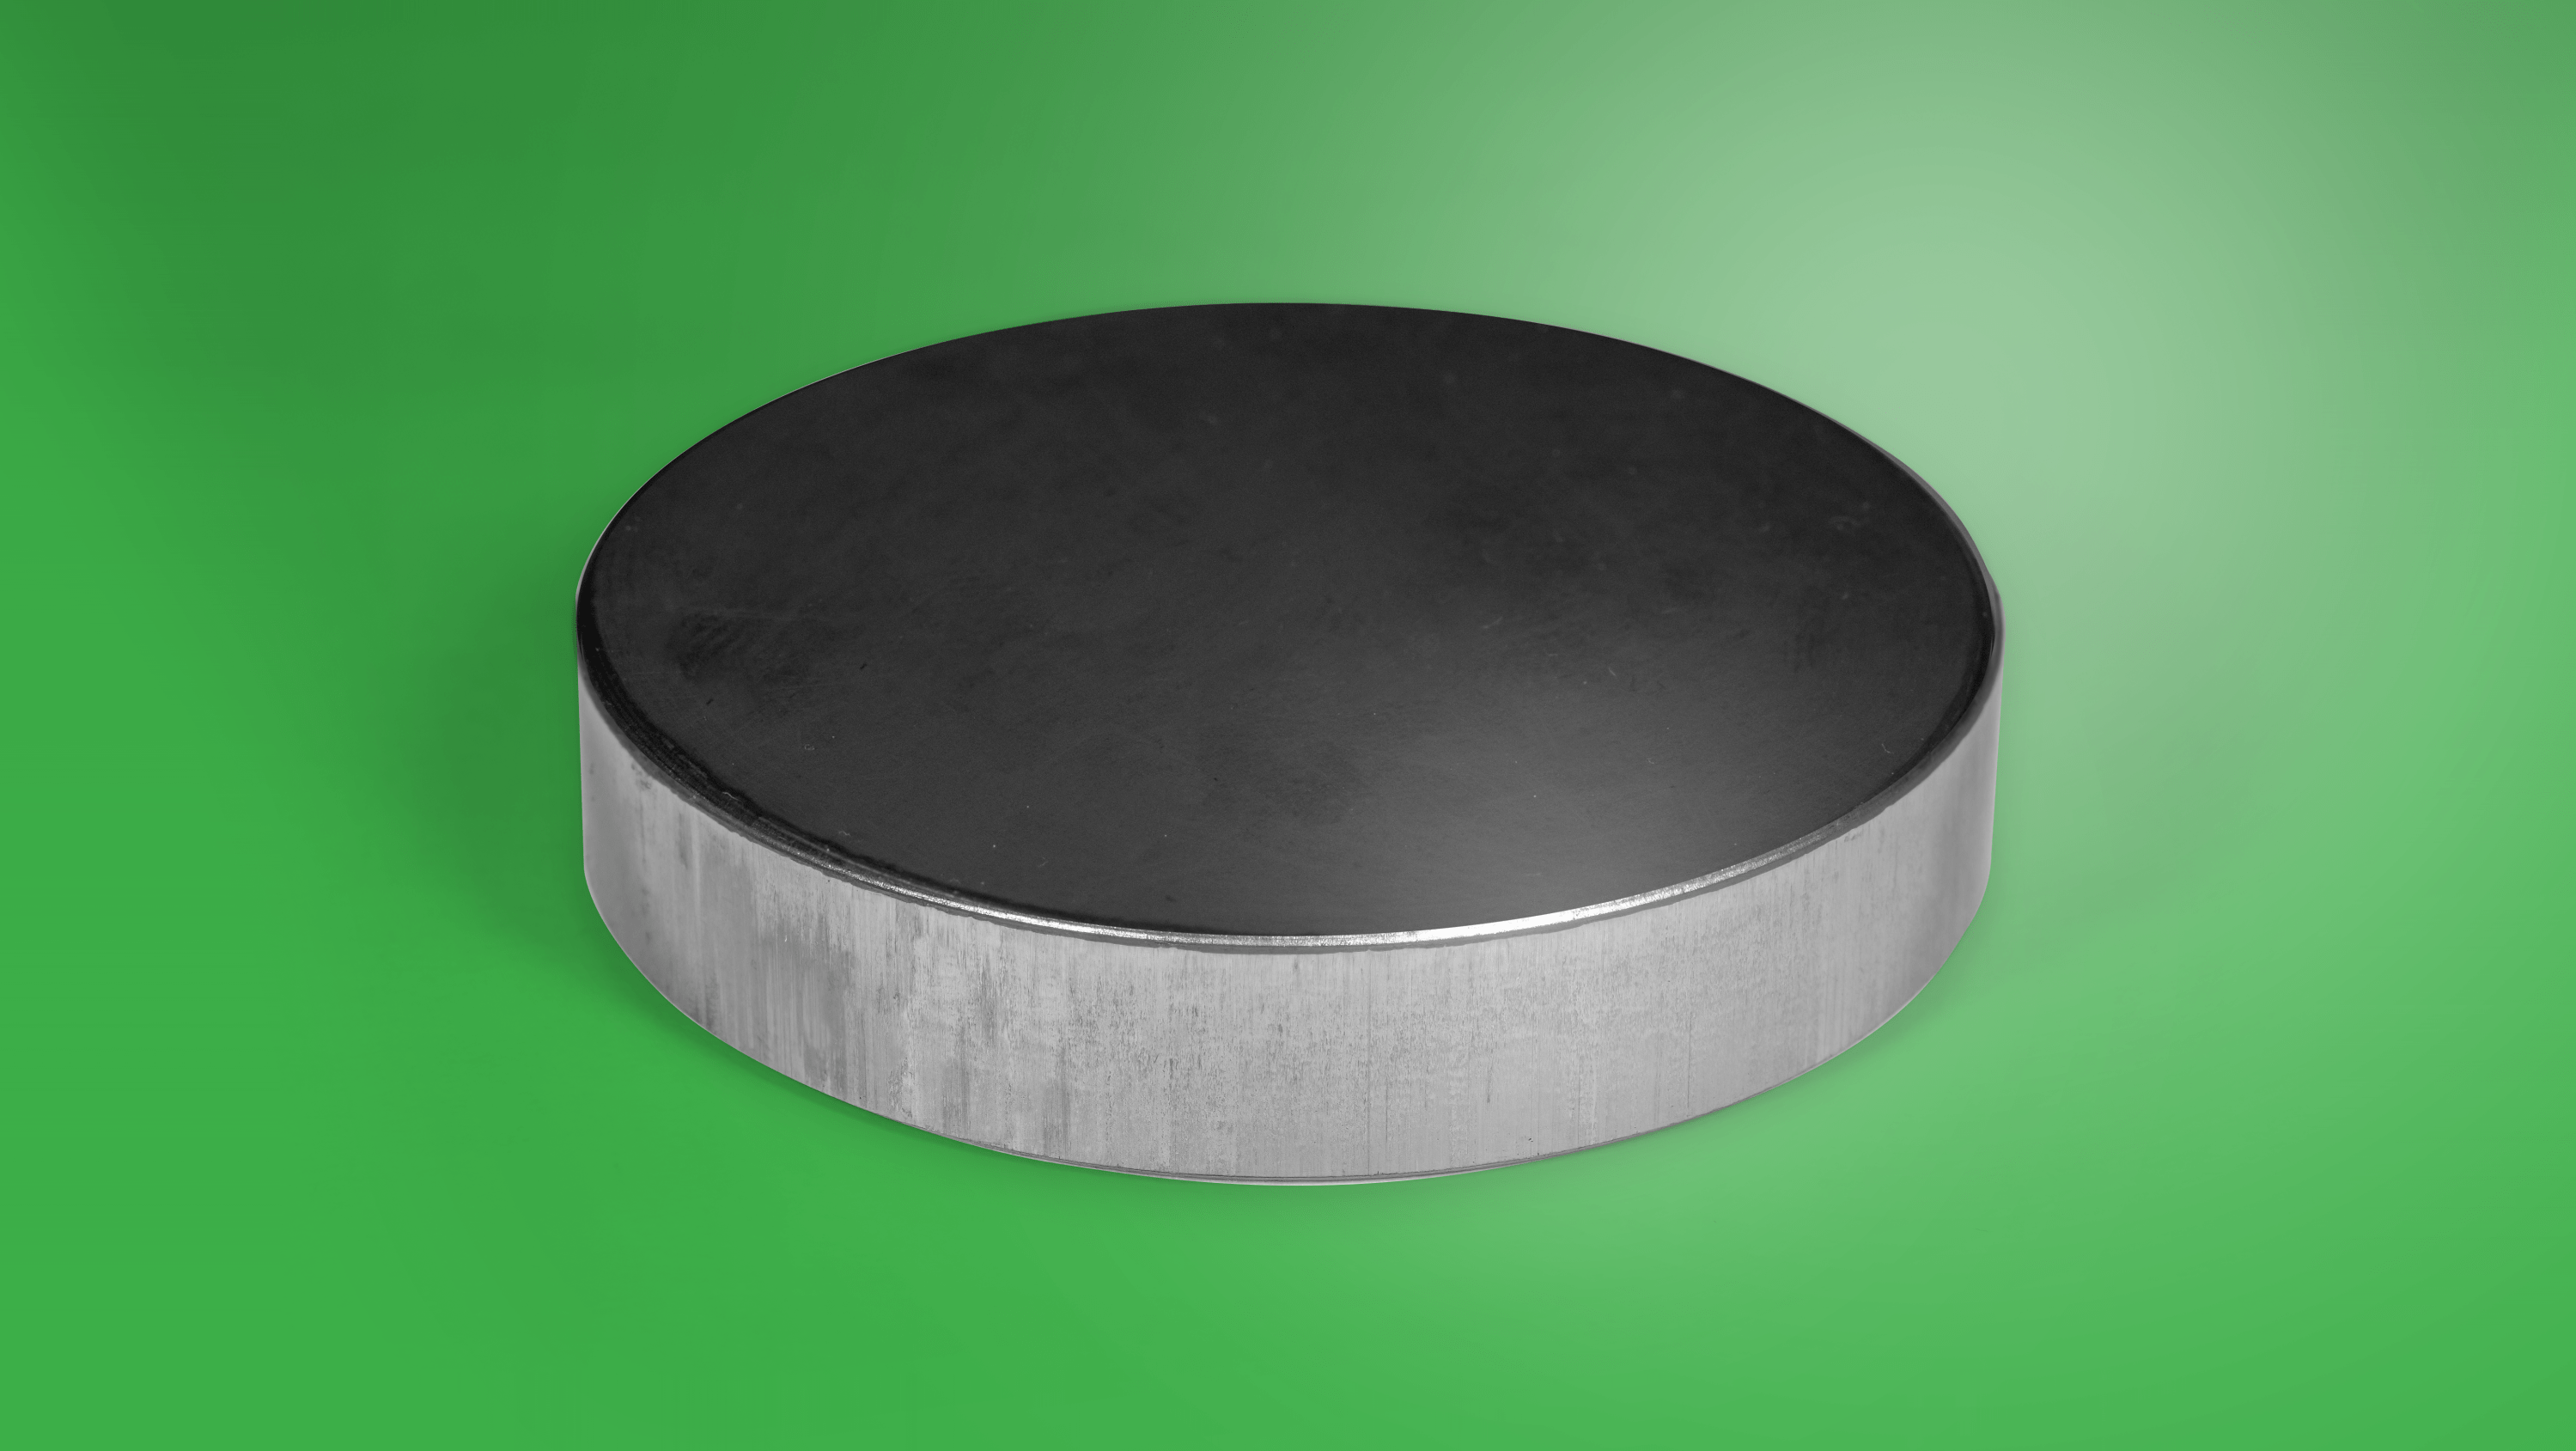 A small metal disc sits on a green background